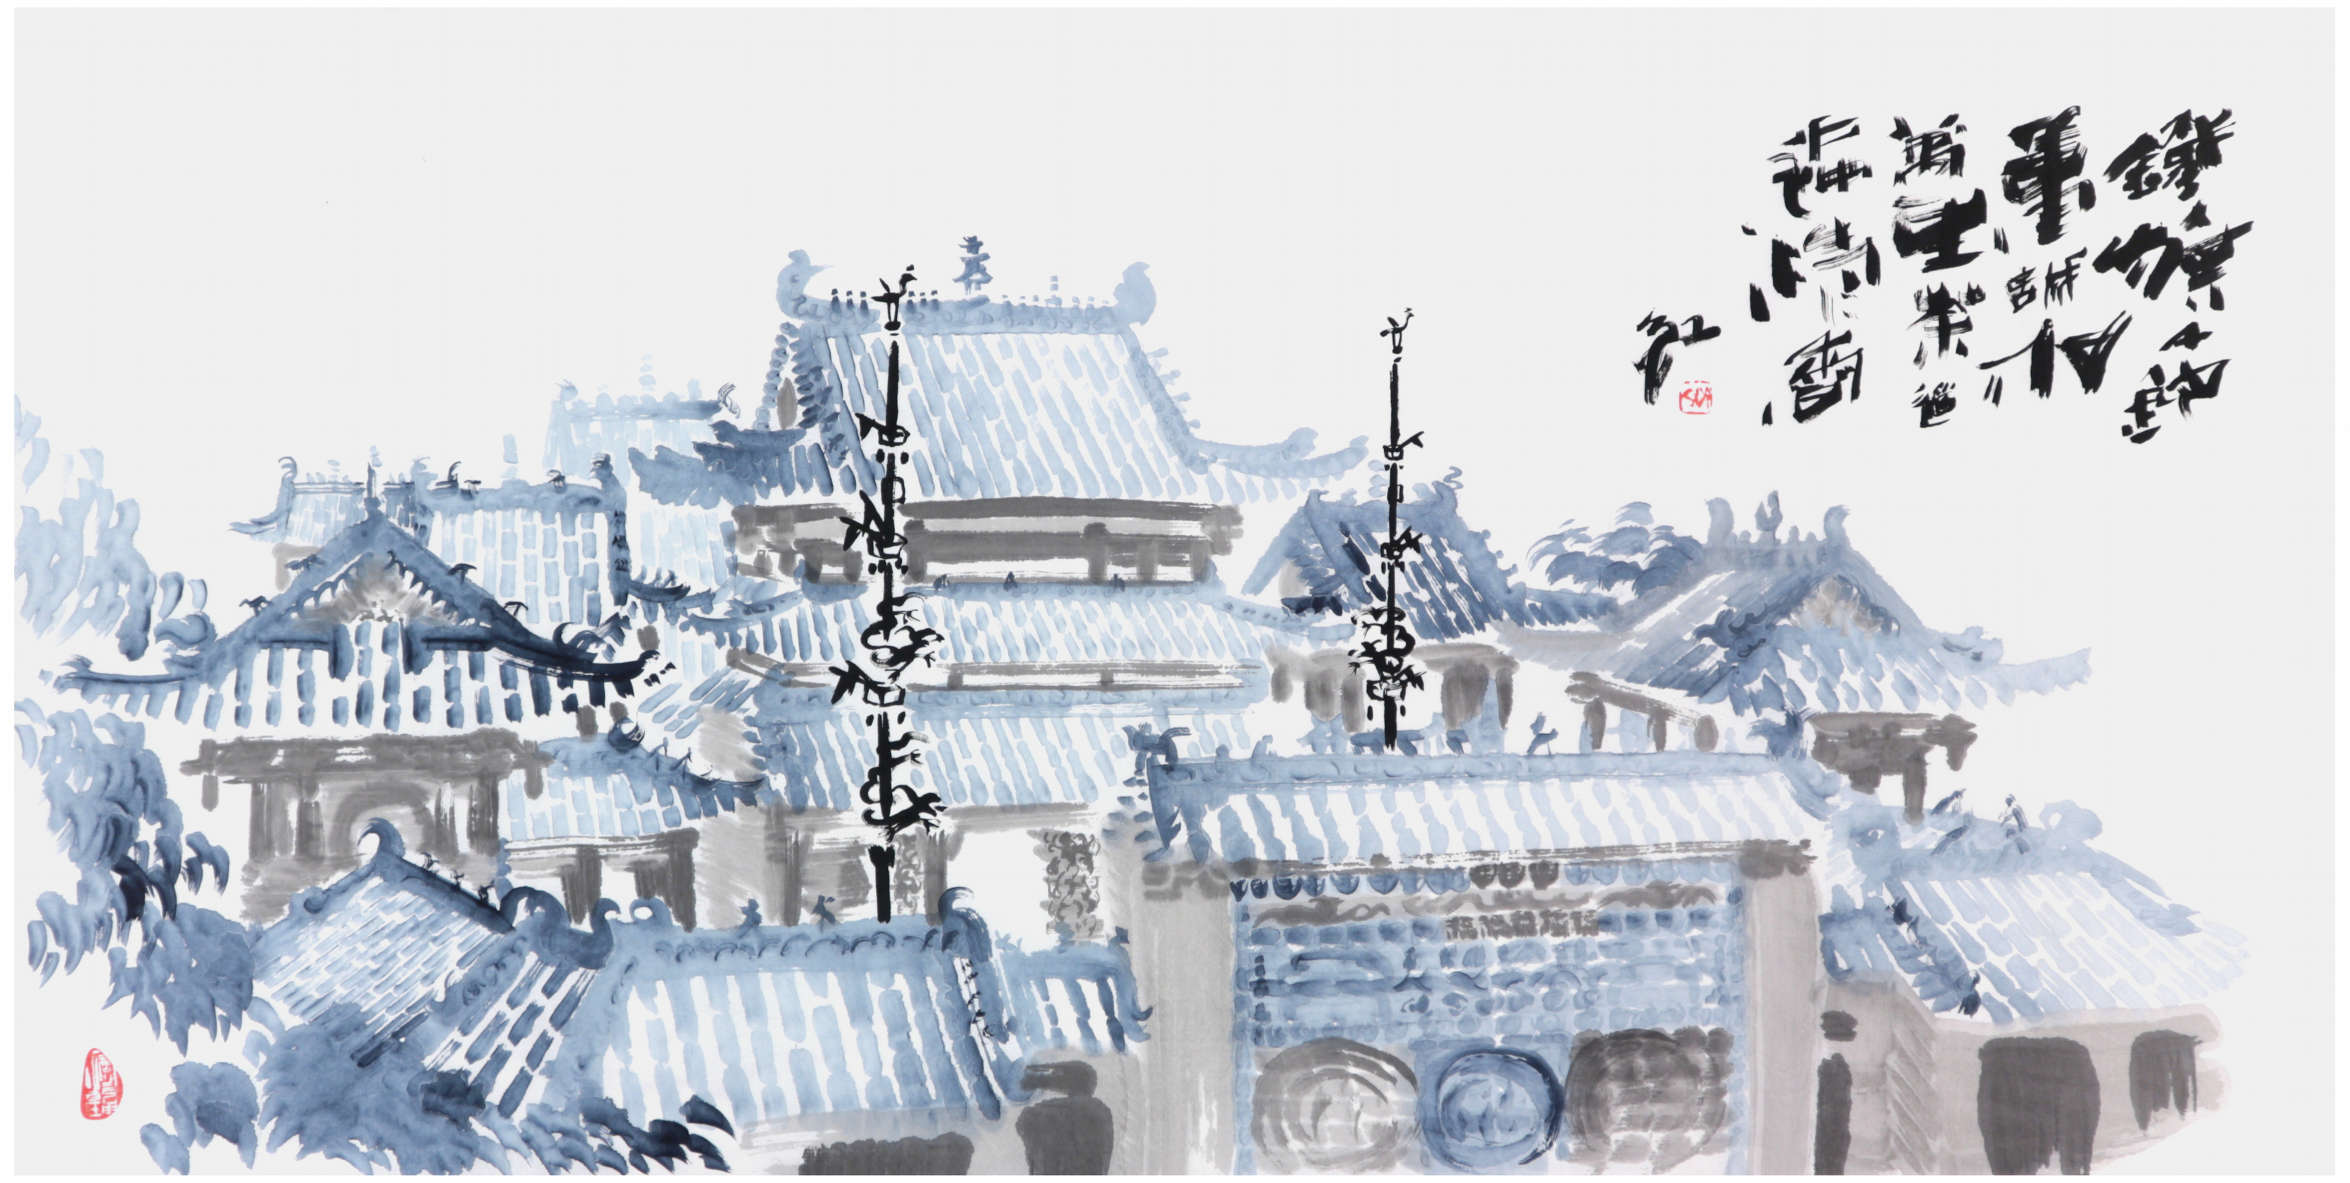 Qi Hong (Sai Koh) 's freehand brushwork style ink wash painting (aka Chinese painting, literati painting, ink painting, ink brush painting): Sheqi Shan Shaan Guild Hall, 138×69cm, ink & color